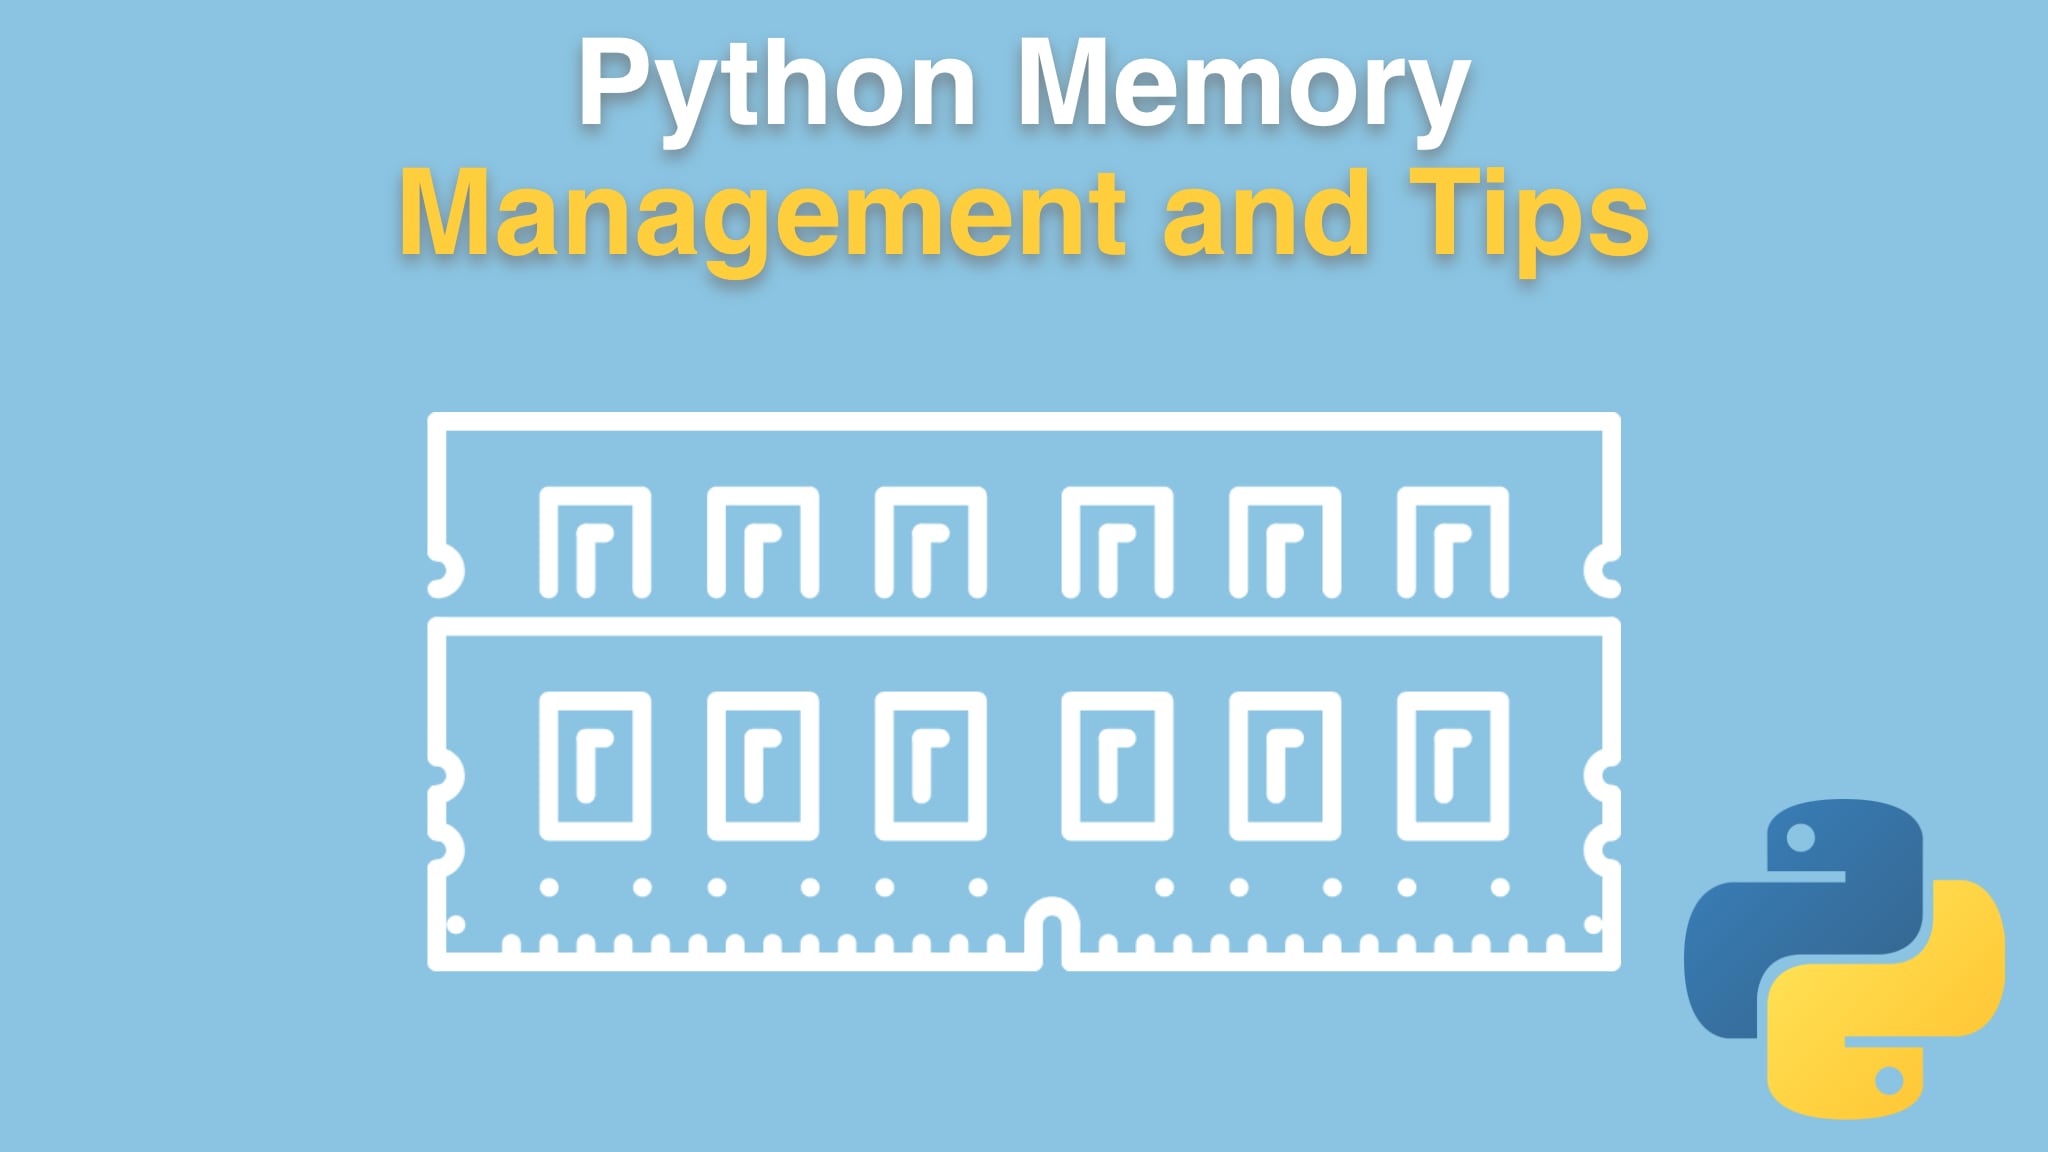 Course: Python Memory Management and Tips